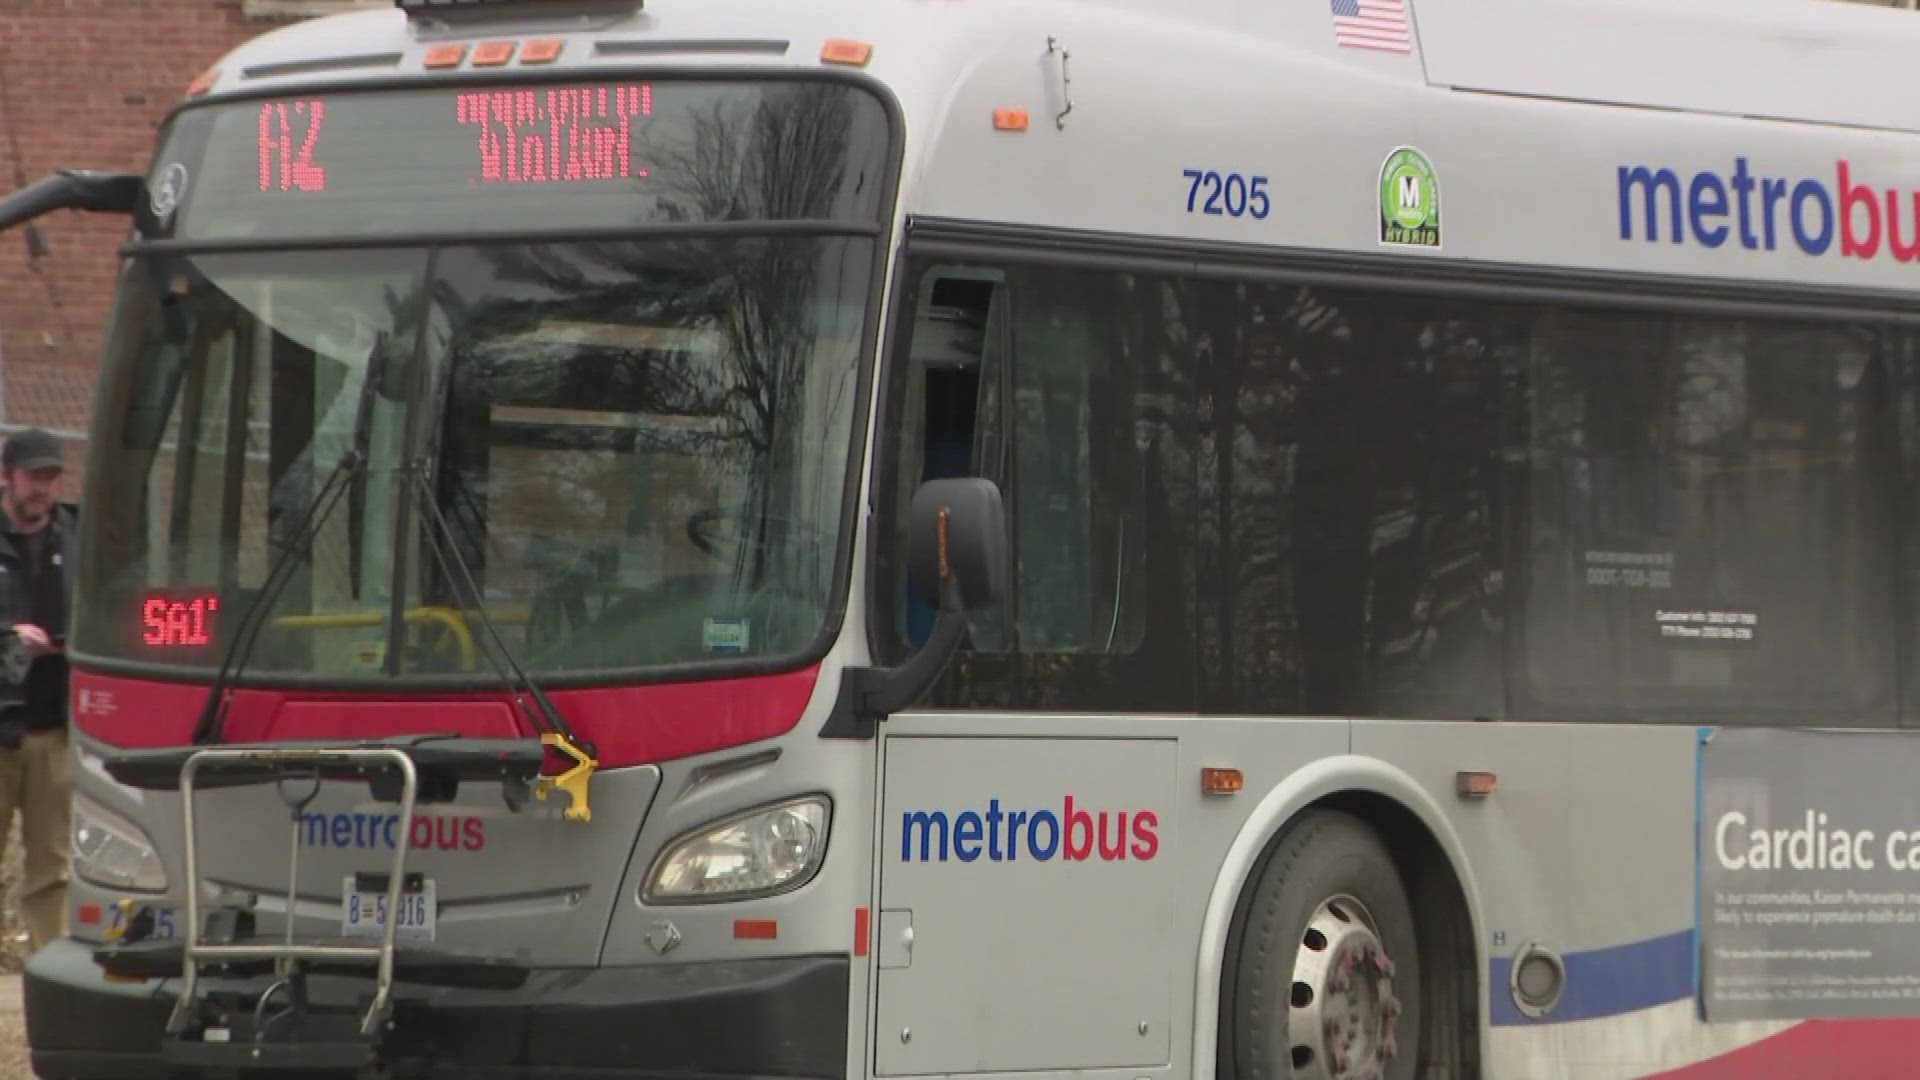 Metro transit police are investigating an armed robbery -- that led to a Metro bus being hit by gunfire.